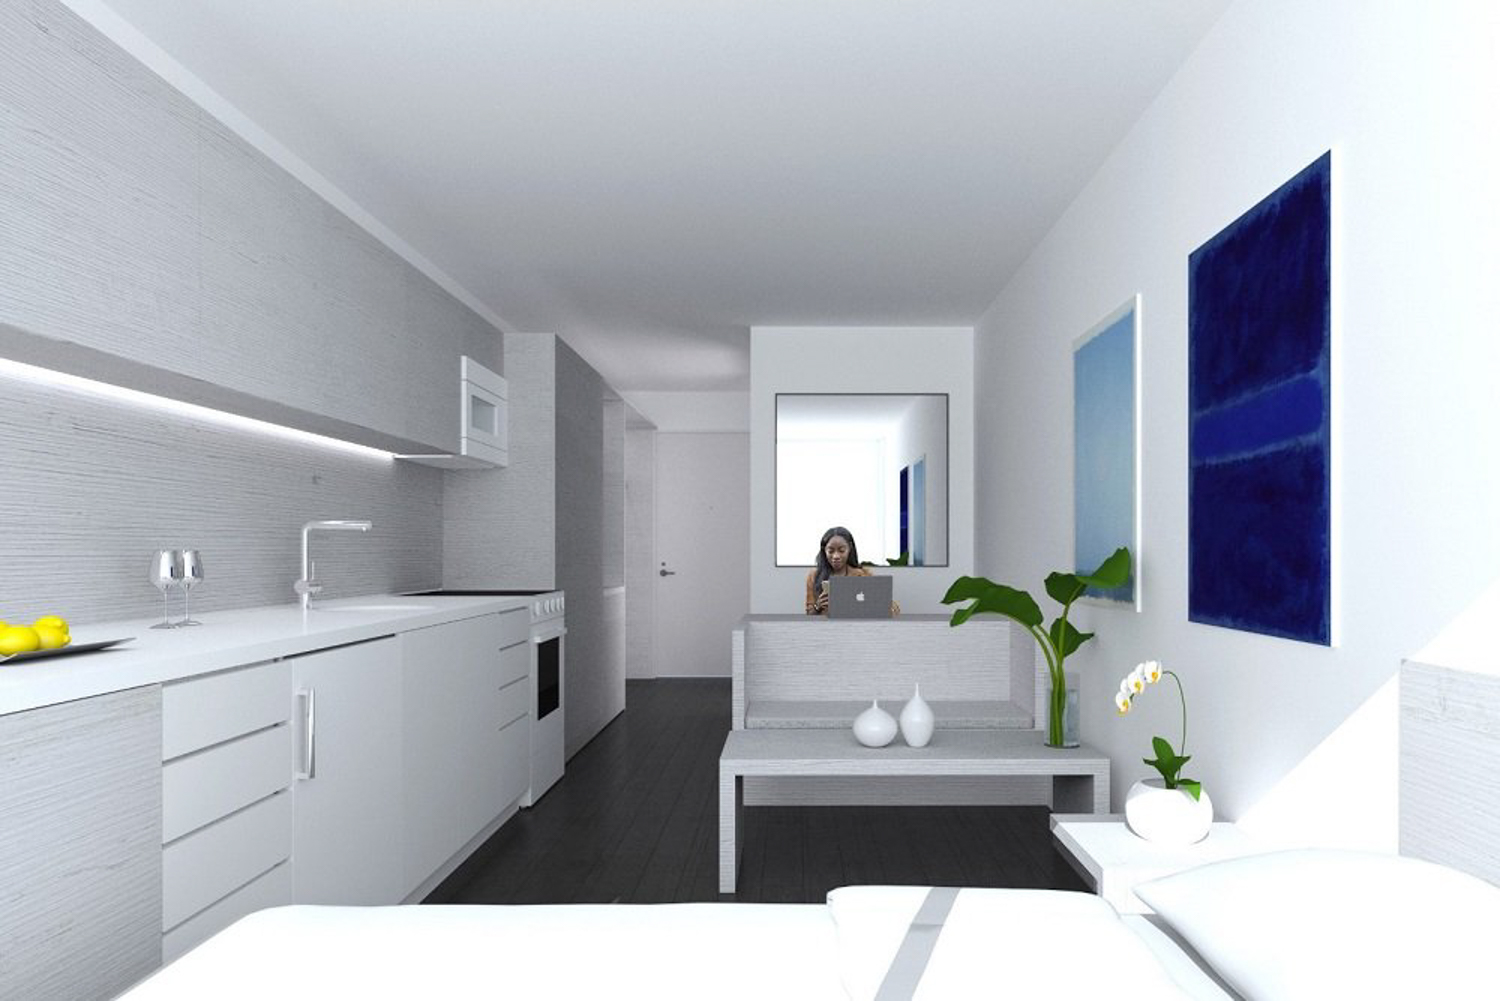 578 7th Street apartment interior, rendering by Stanley Saitowitz Natoma Architects